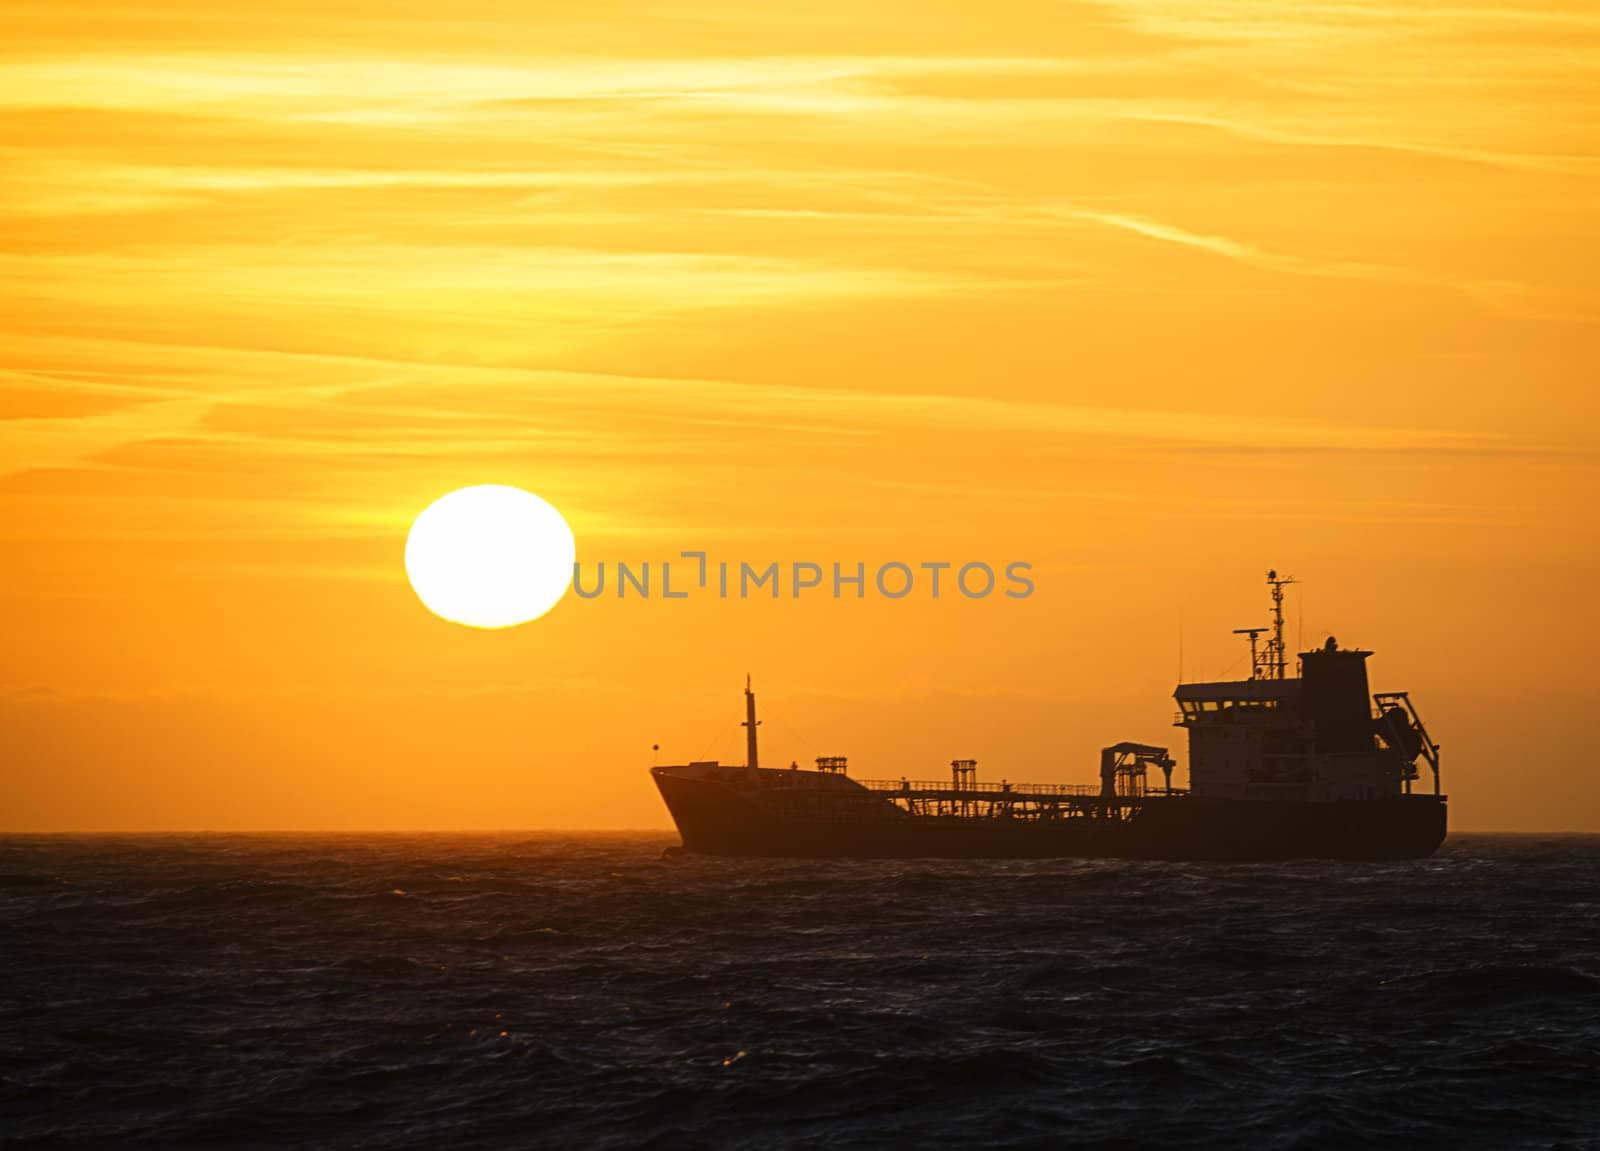 Ship sunset silhouette by nprause